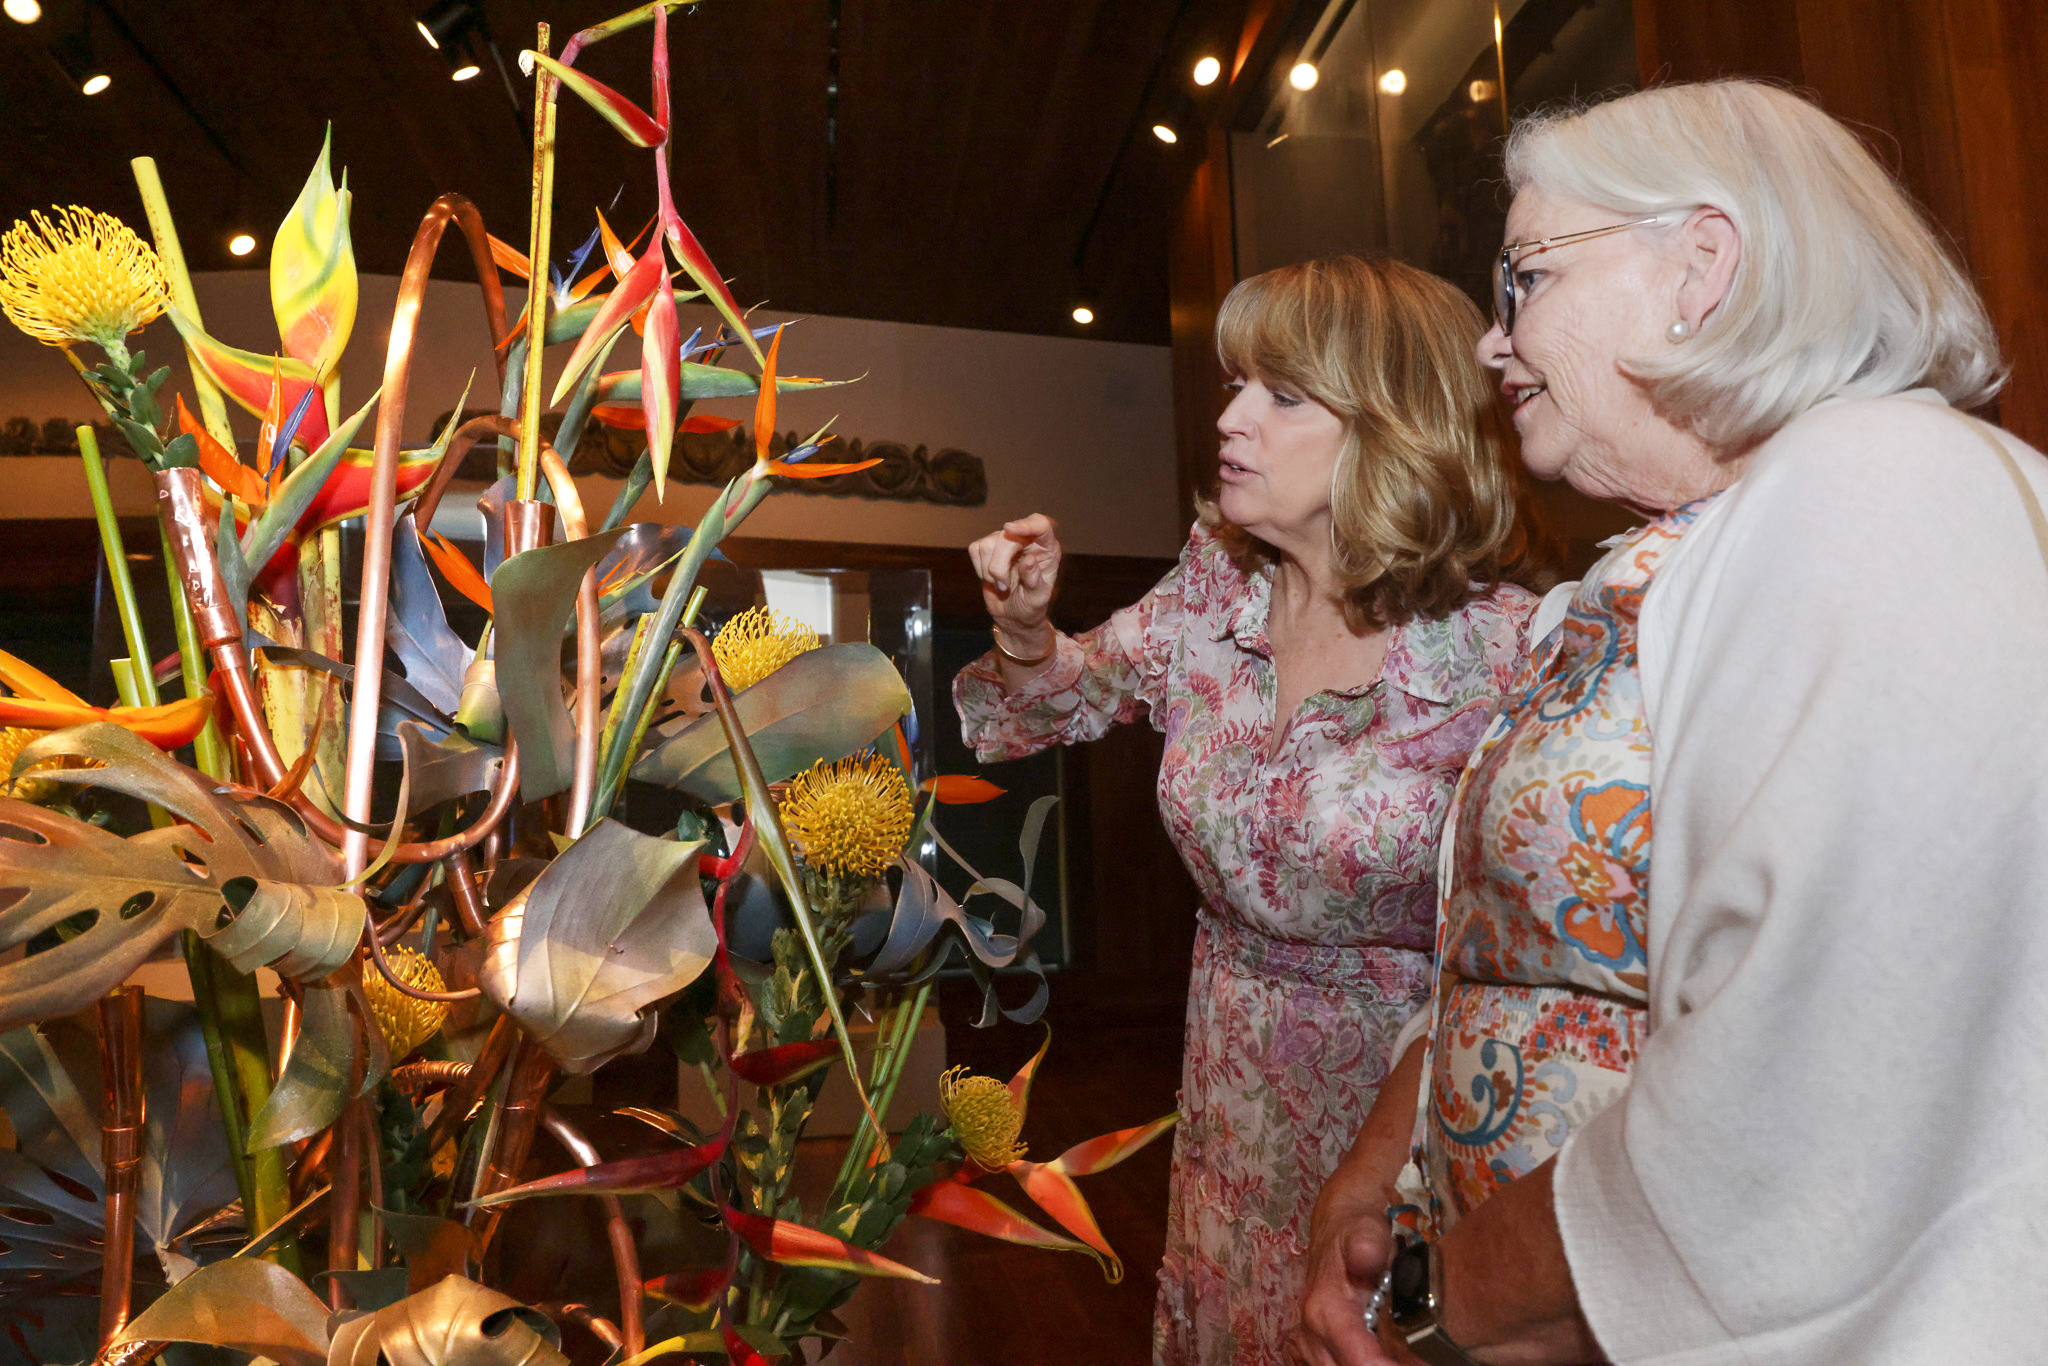 Two women, one elderly and one middle-aged, admire a vibrant floral arrangement featuring yellow and orange blooms in an indoor setting with soft lighting.